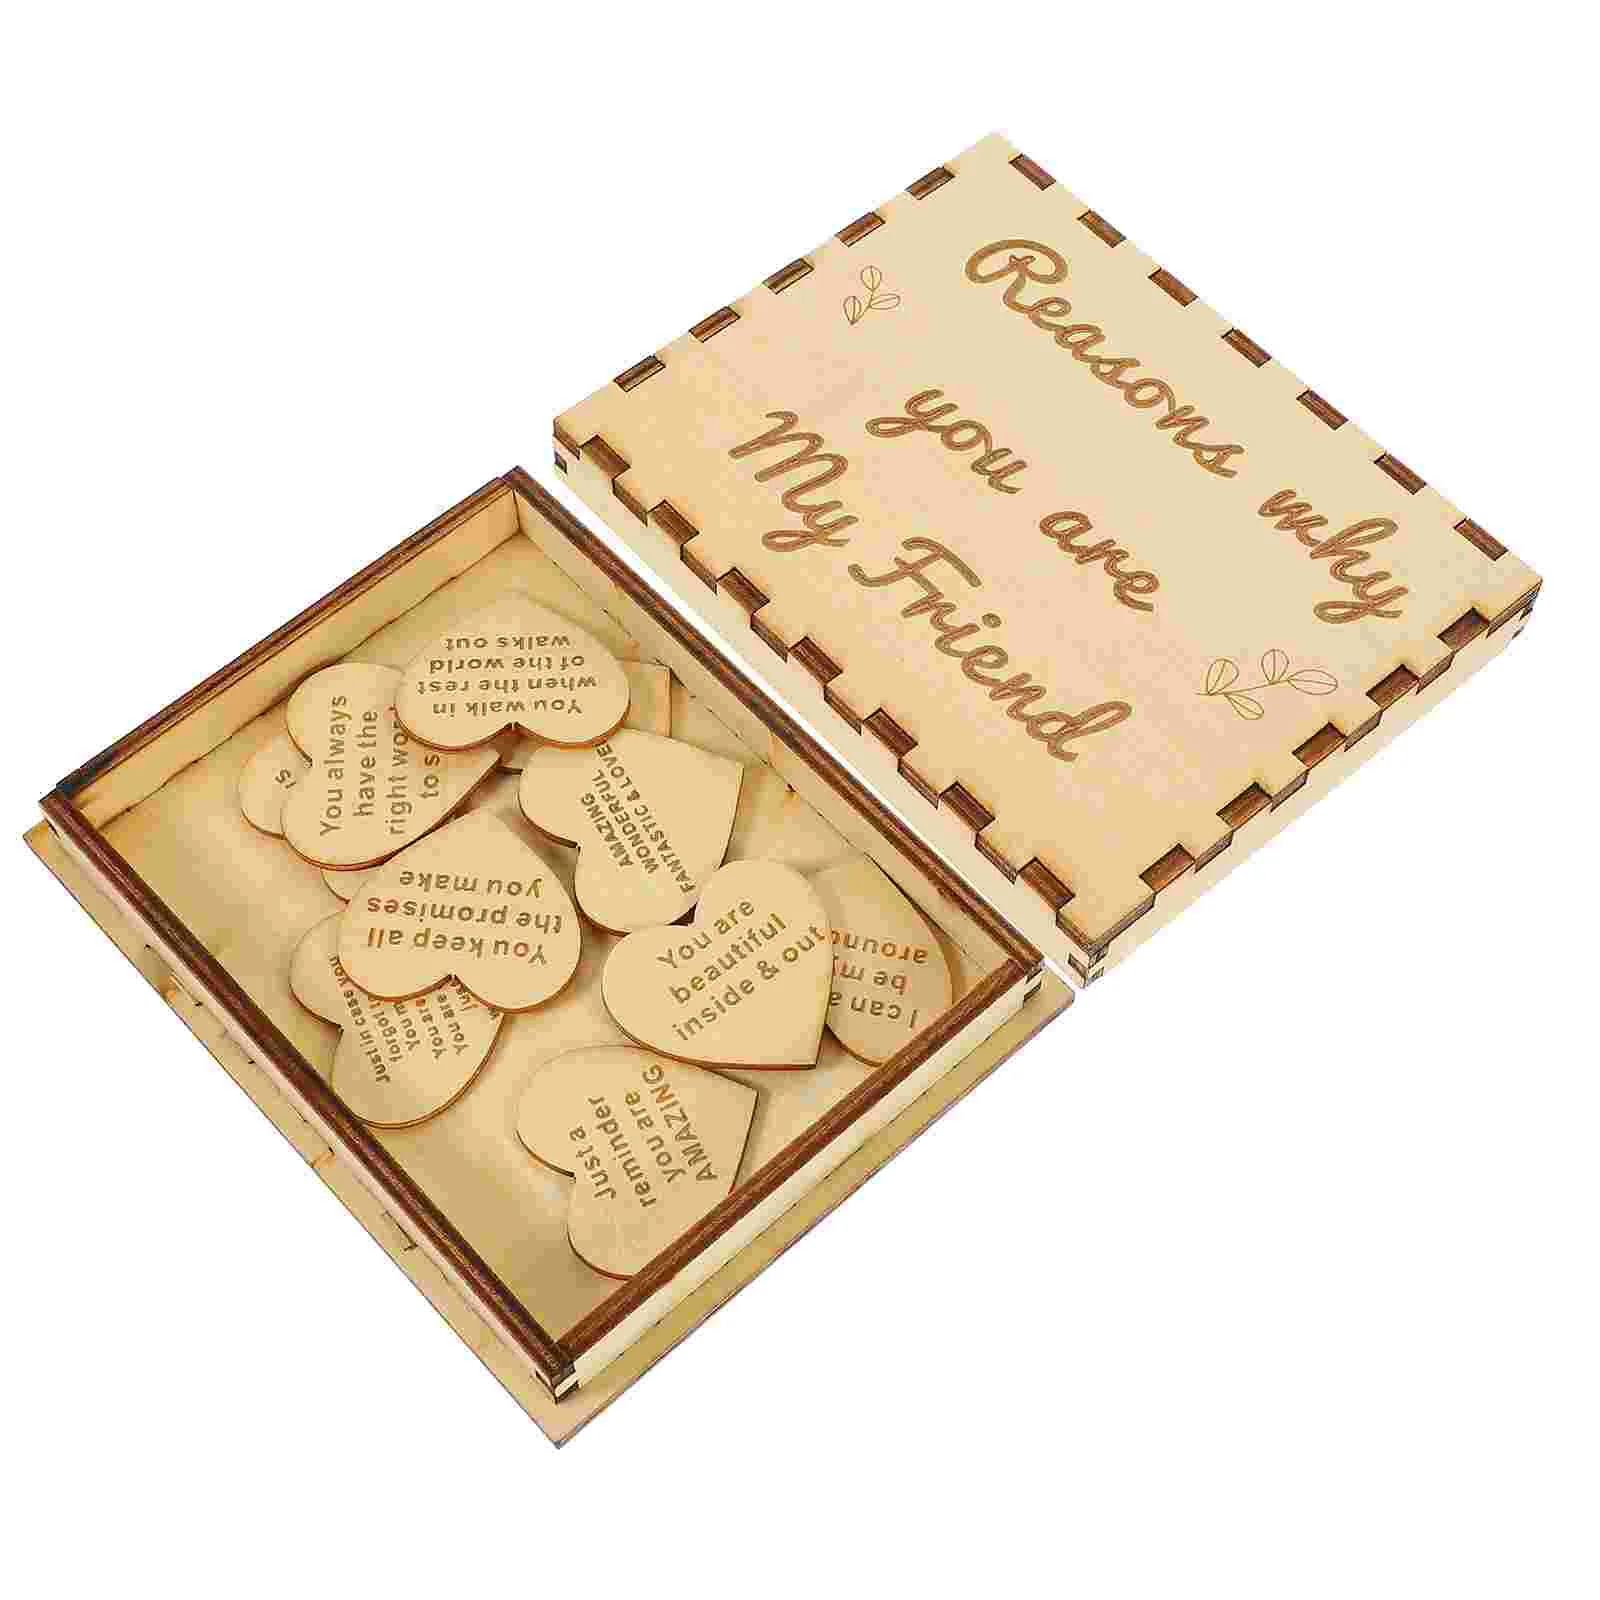 

1 Set Friendship Appreciation The Gift Wood Keepsake Box with Wood Heart Slices for Friends